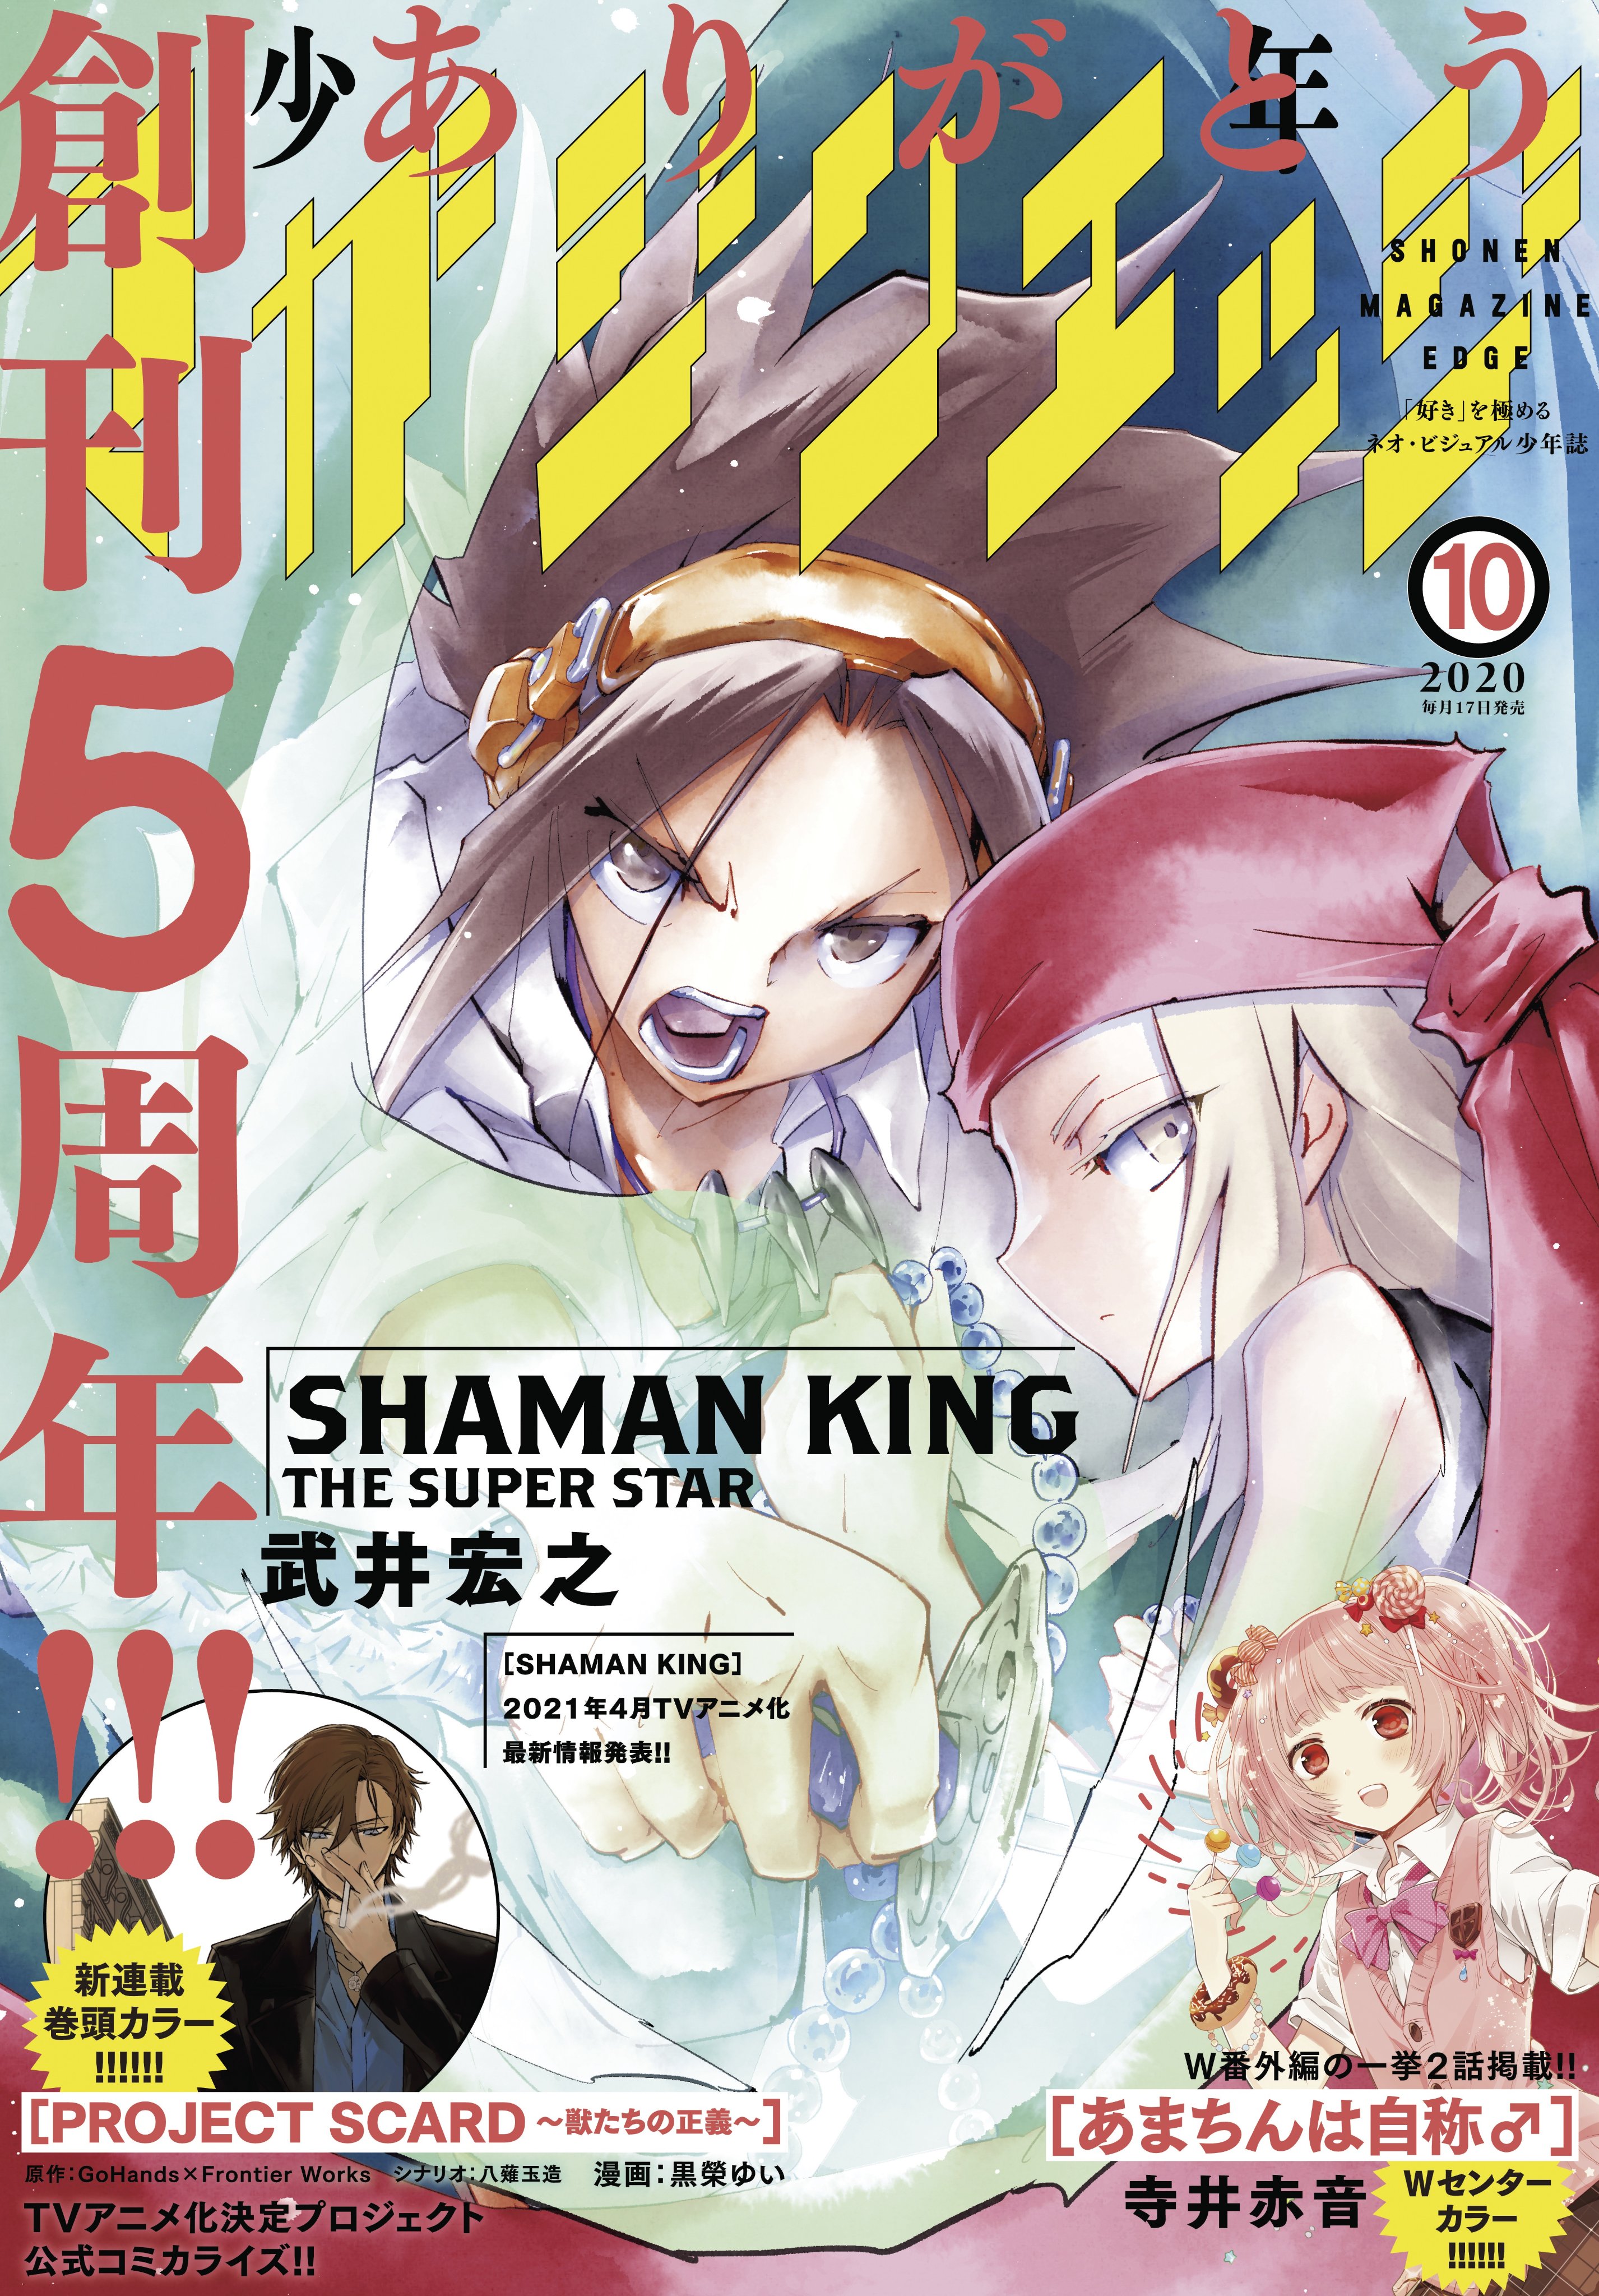 Patch Cafe Shaman King News Feed Shonen Magazine Edge Cover Design For The October Issue On Sale In Print And Digitally On September 17th In Japan Contains One